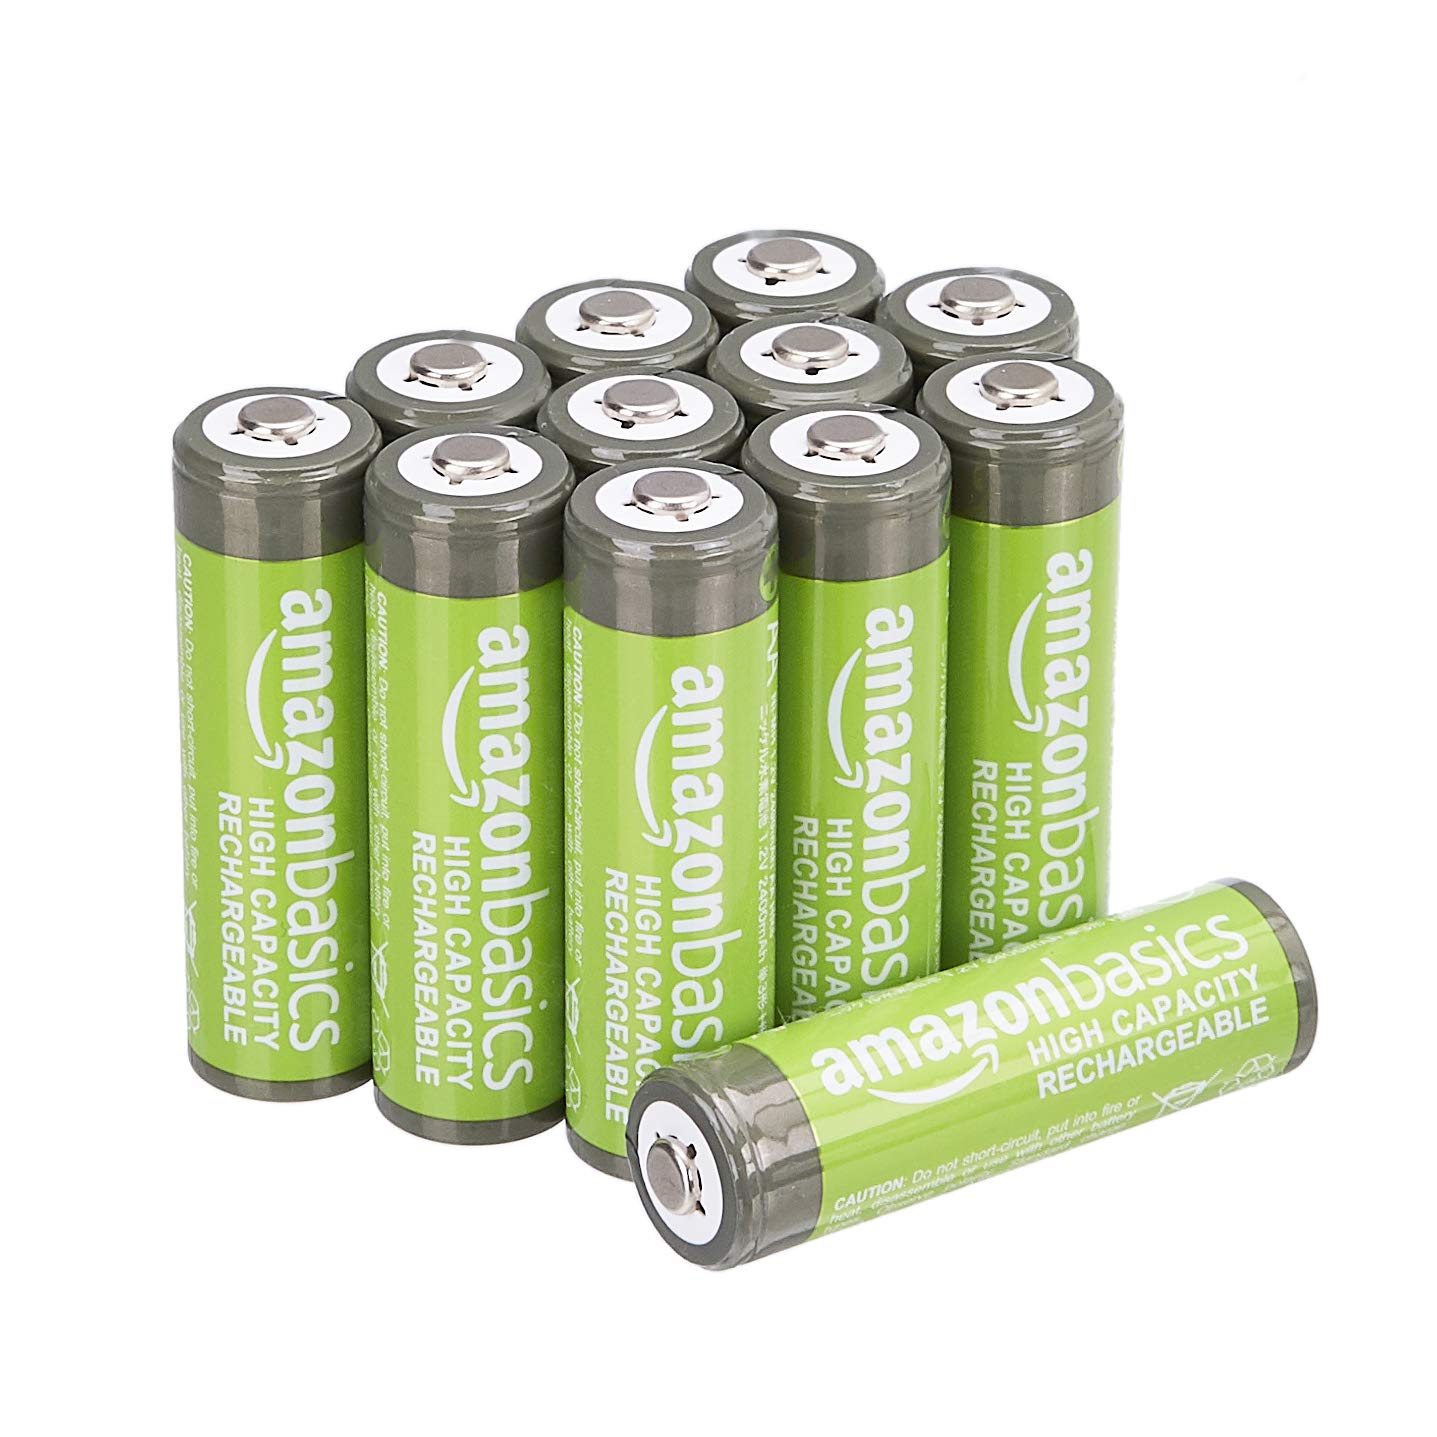 Amazon Basics Rechargeable AA NiMH High-Capacity Batteries, 2400 mAh, Recharge up to 400x, Pre-Charged - Pack of 12